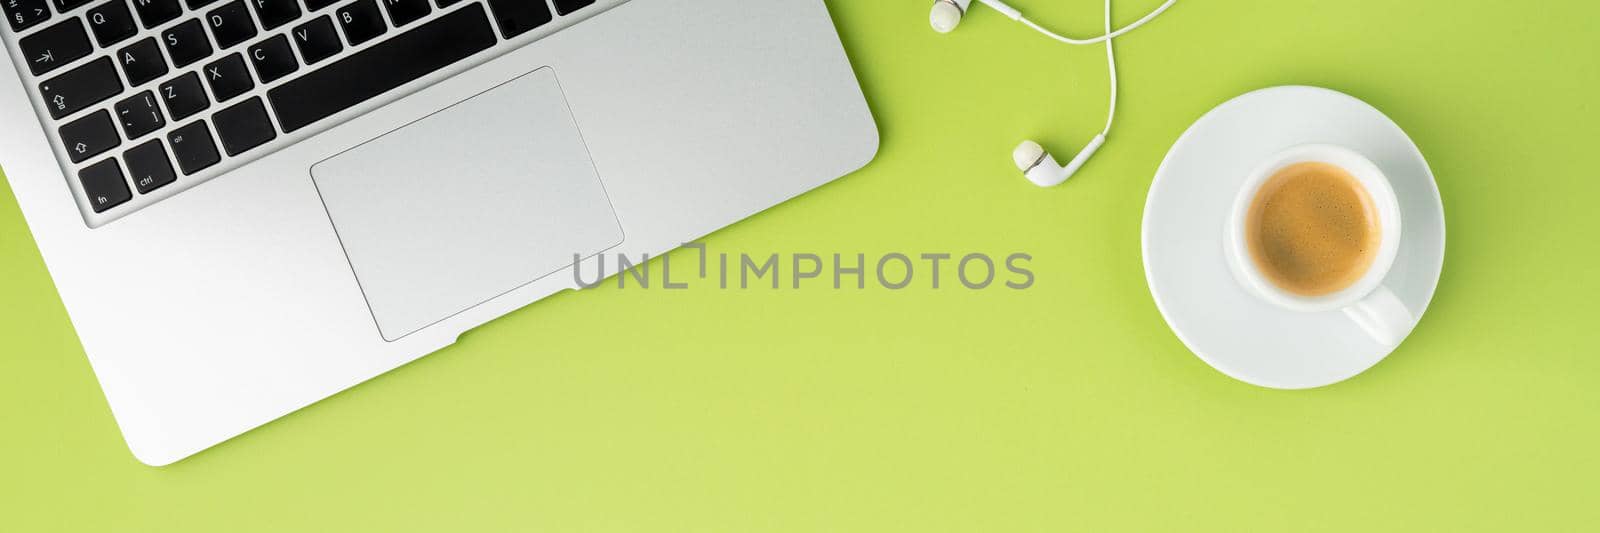 Banner of metallic laptop keyboard, white earphones and coffee cup on light green background by NataBene